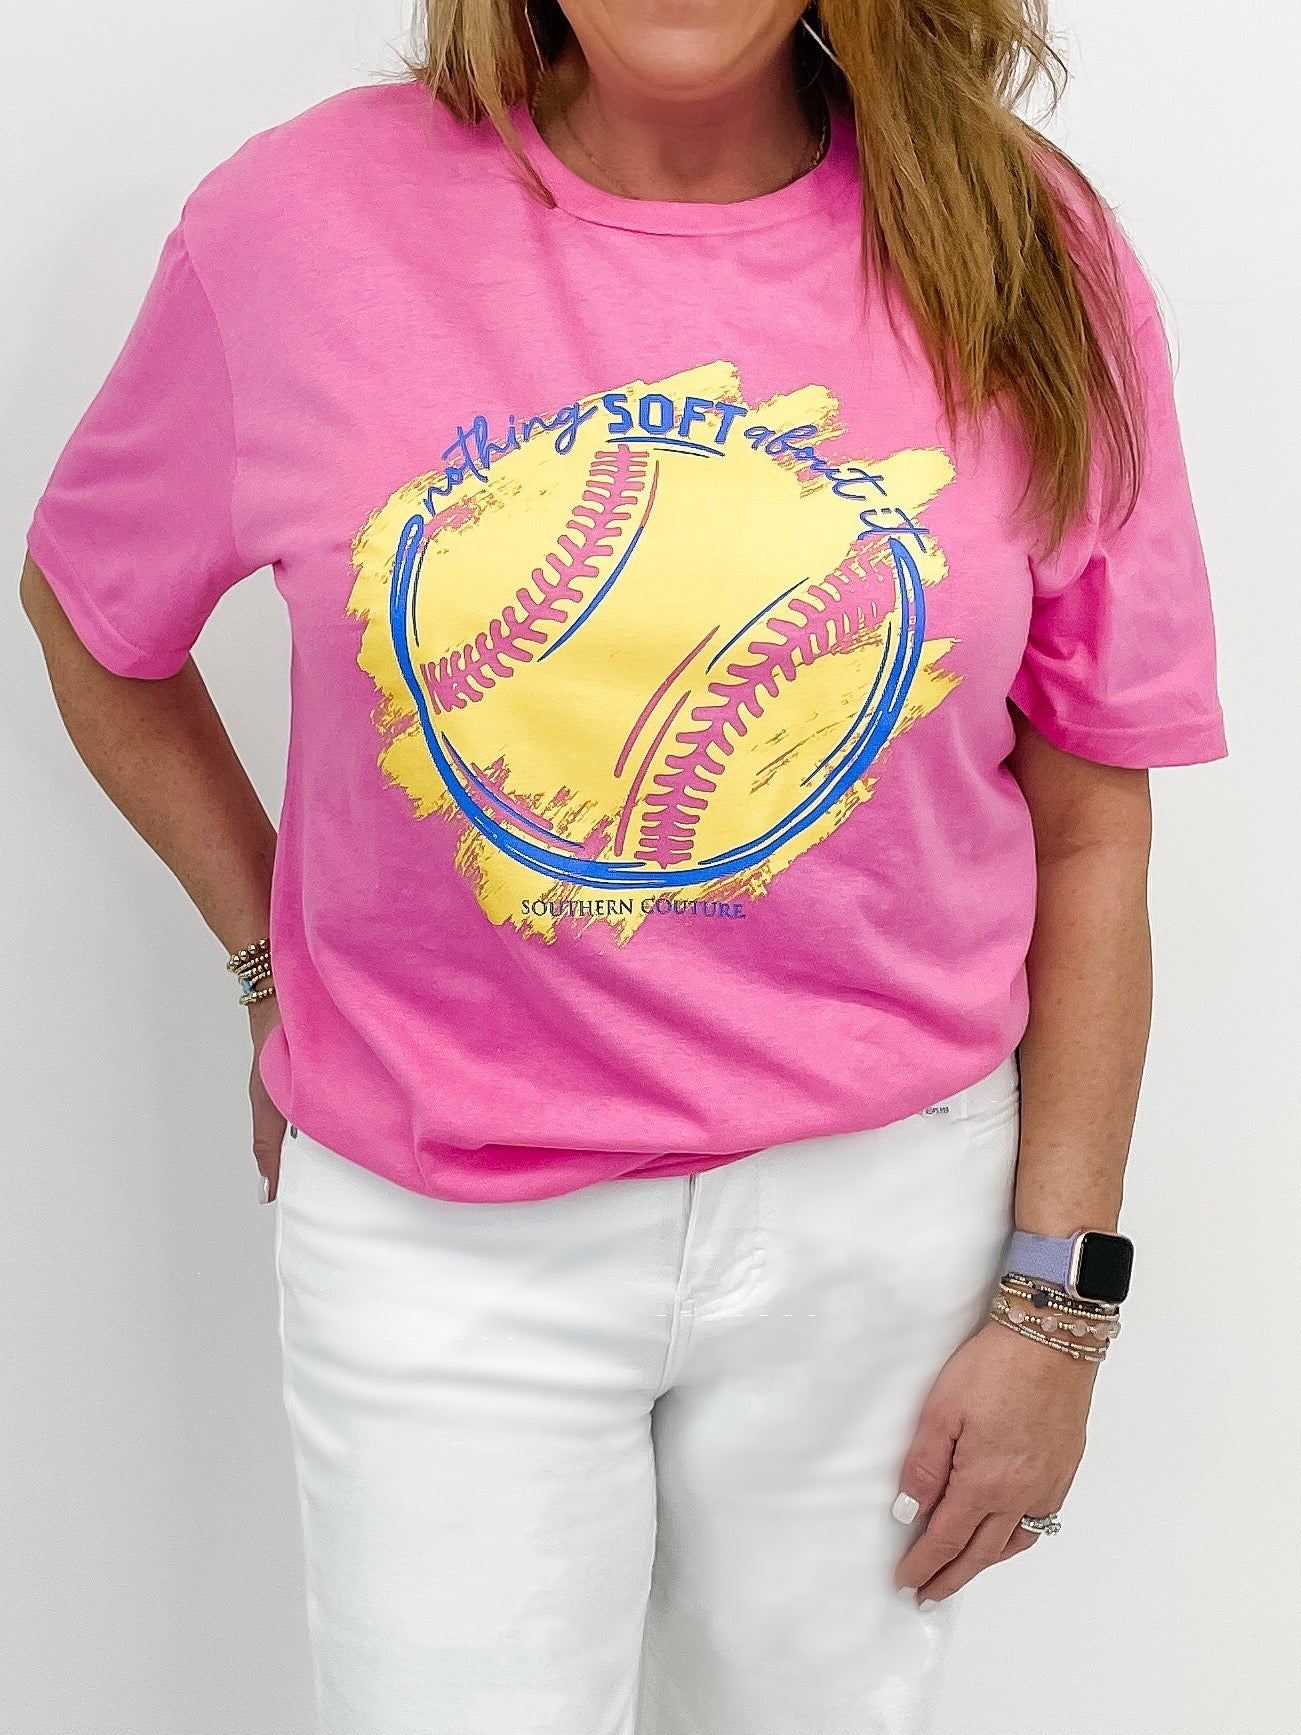 Nothin' Soft About It Softball Tee